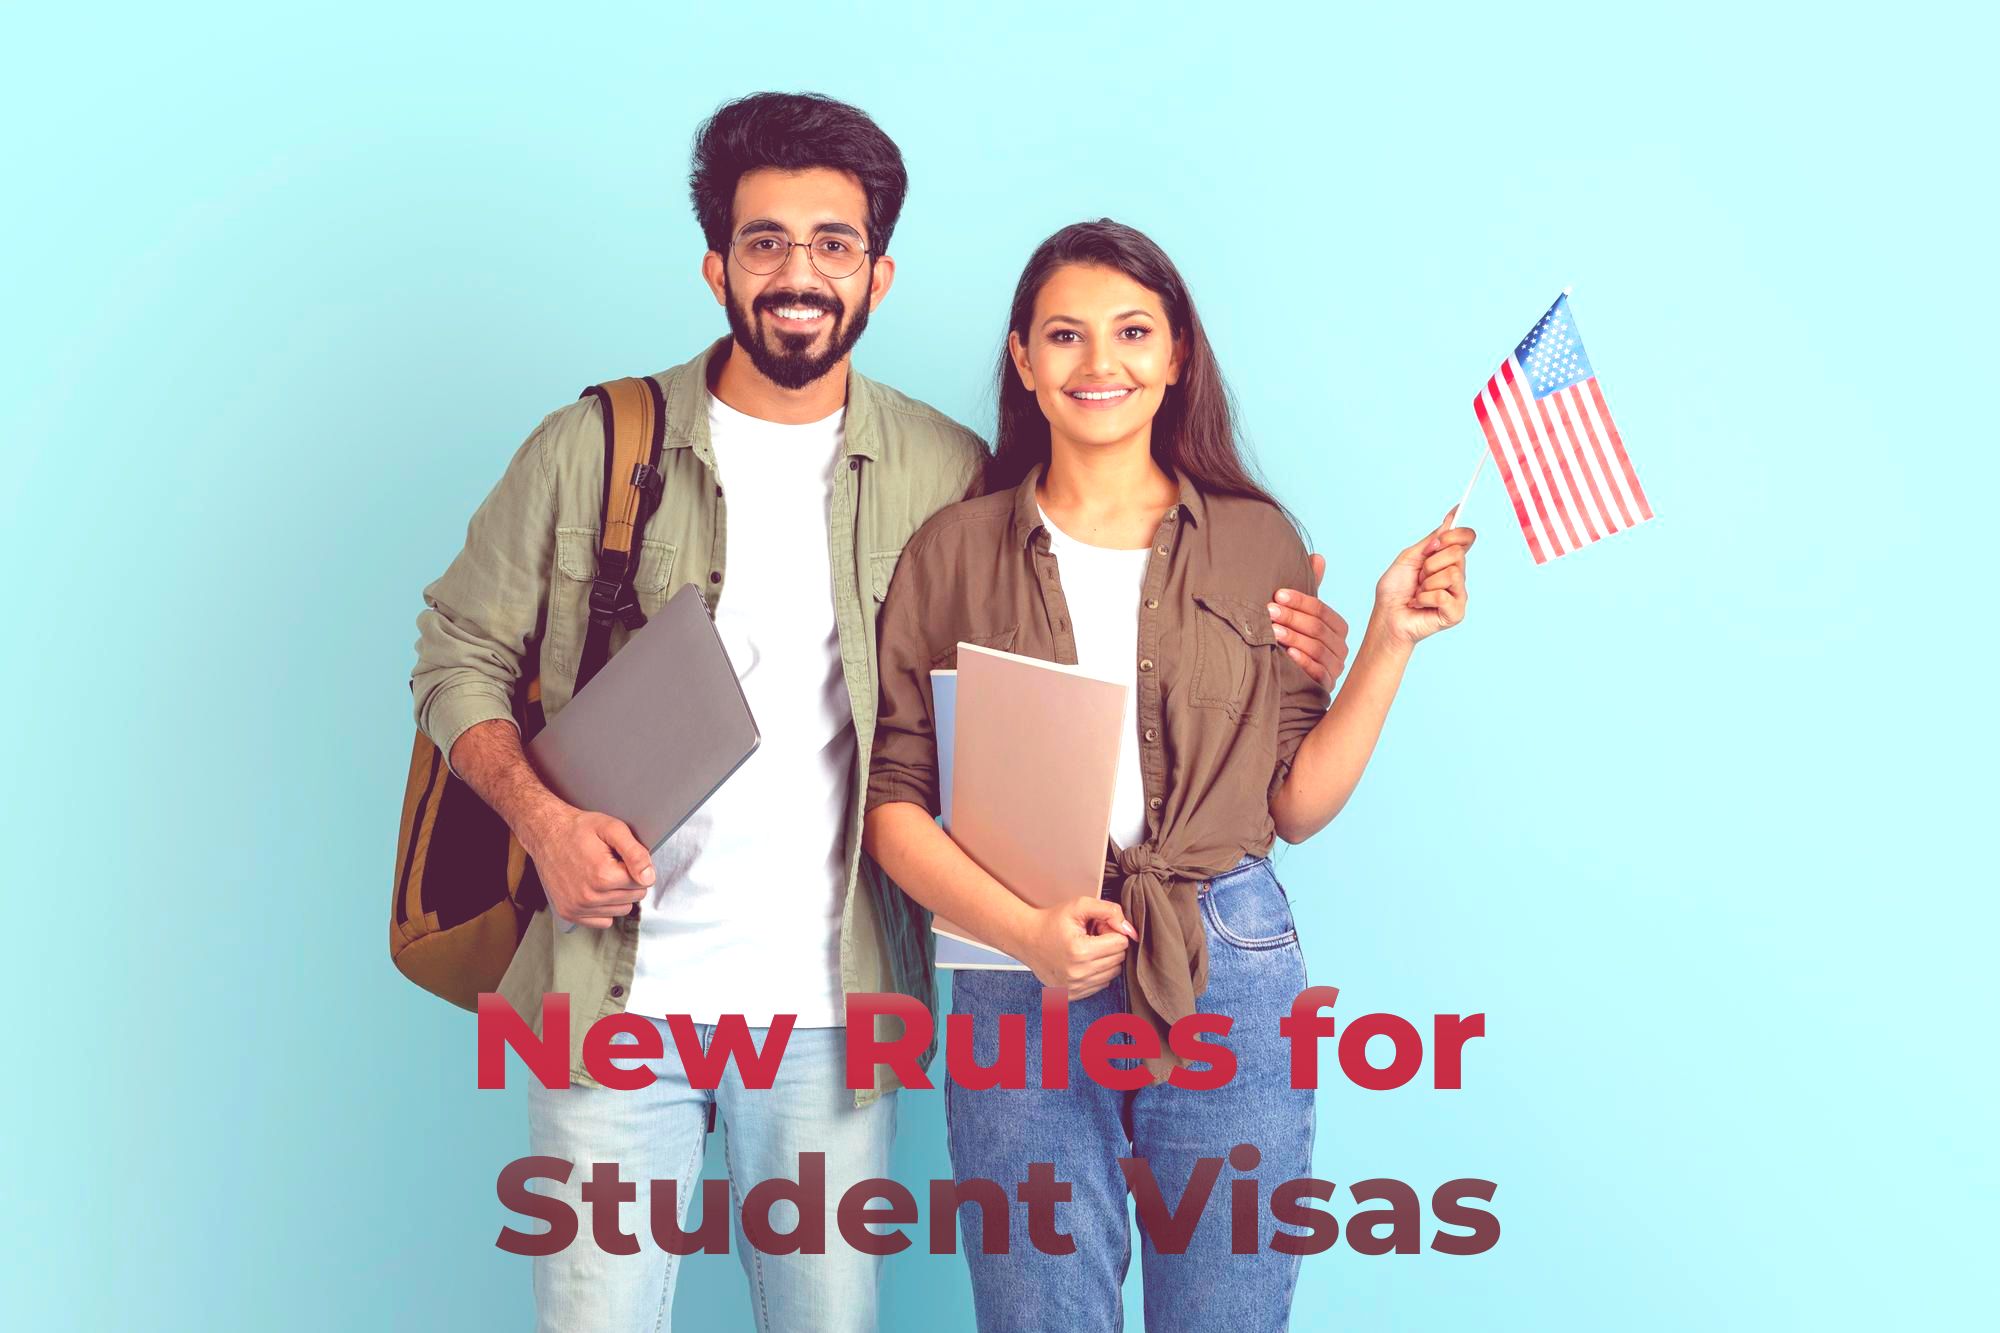 New Rules for Student Visa Seeking Admission in US, Protecting Against Fraud